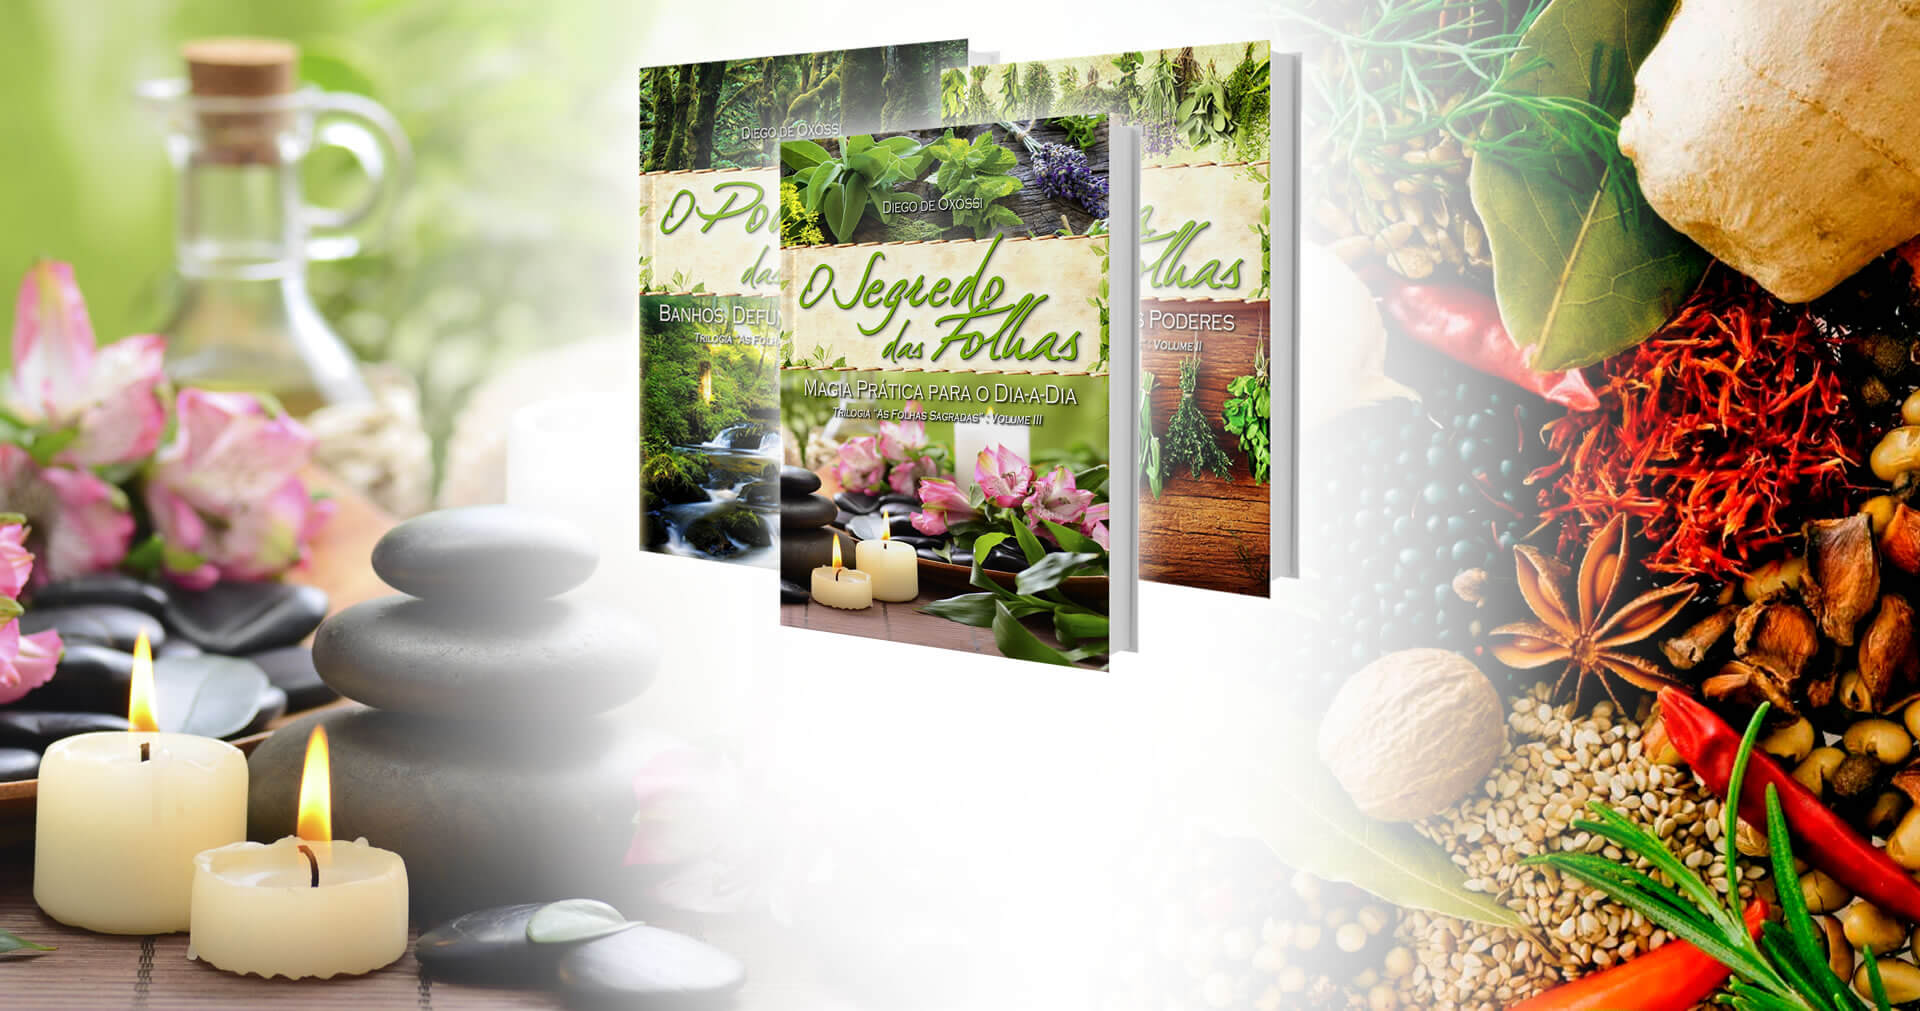 Diego de Oxóssi | In volume 2 of the collection, babalosha Diego de Oxóssi presents the biggest dictionary of magic herbs in Brazil, with 365 plants in details.